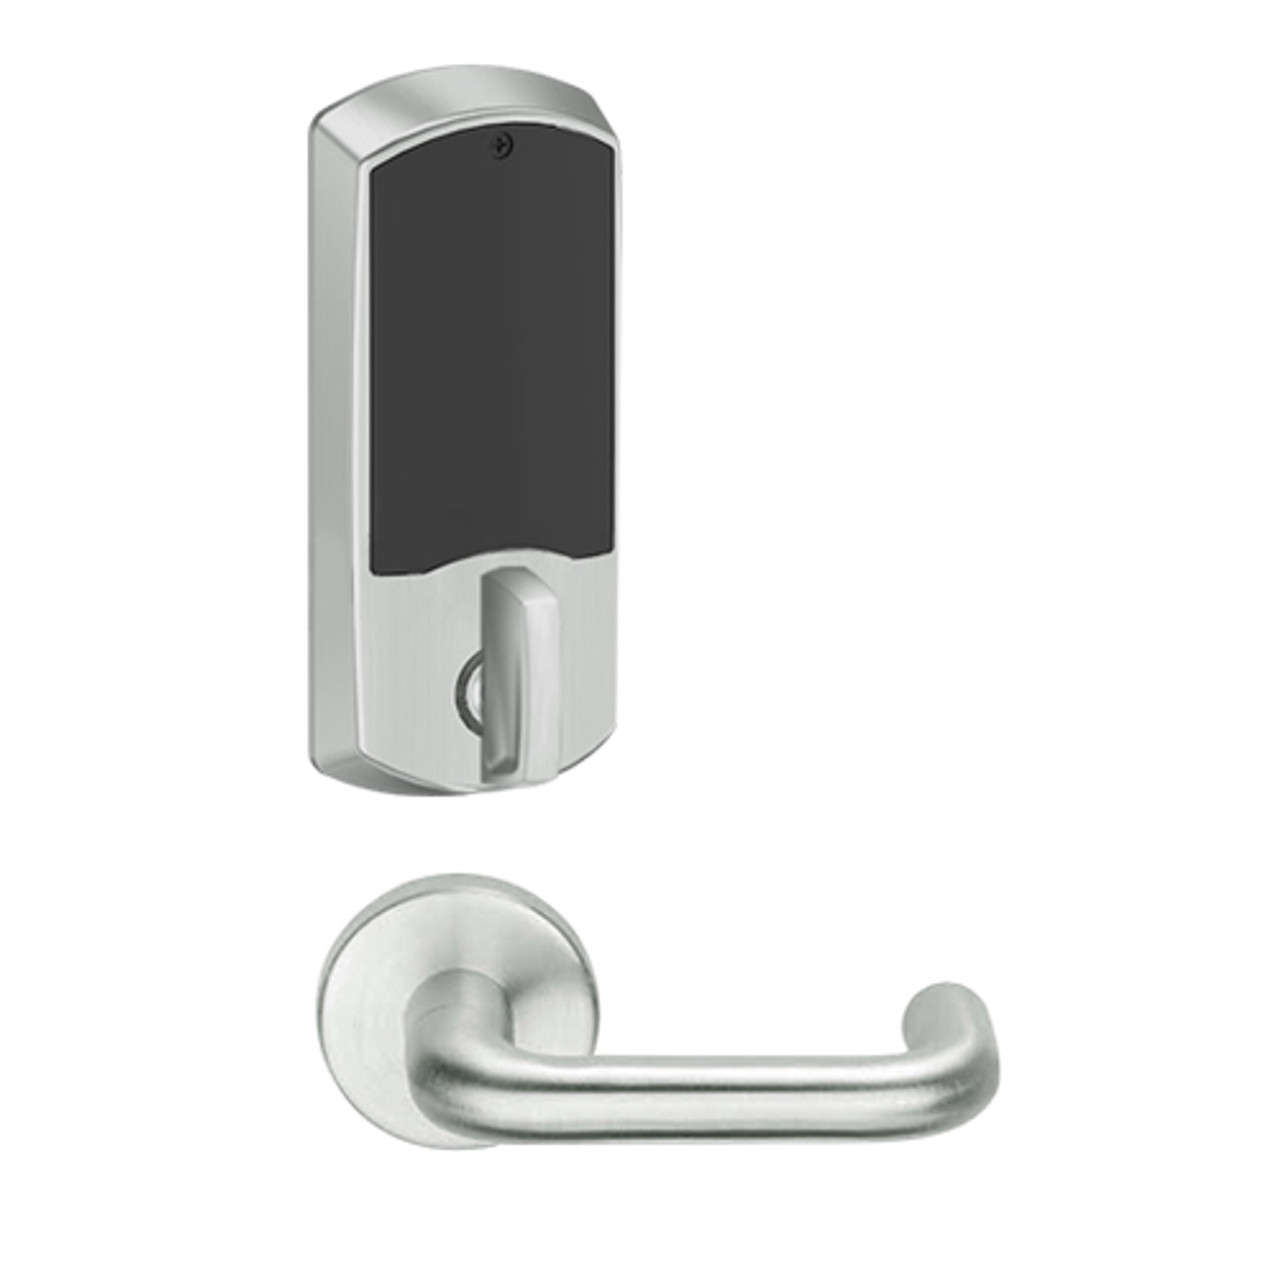 LEMD-GRW-BD-03-619-00C Schlage Privacy/Apartment Wireless Greenwich Mortise Deadbolt Lock with LED and Tubular Lever Prepped for SFIC in Satin Nickel